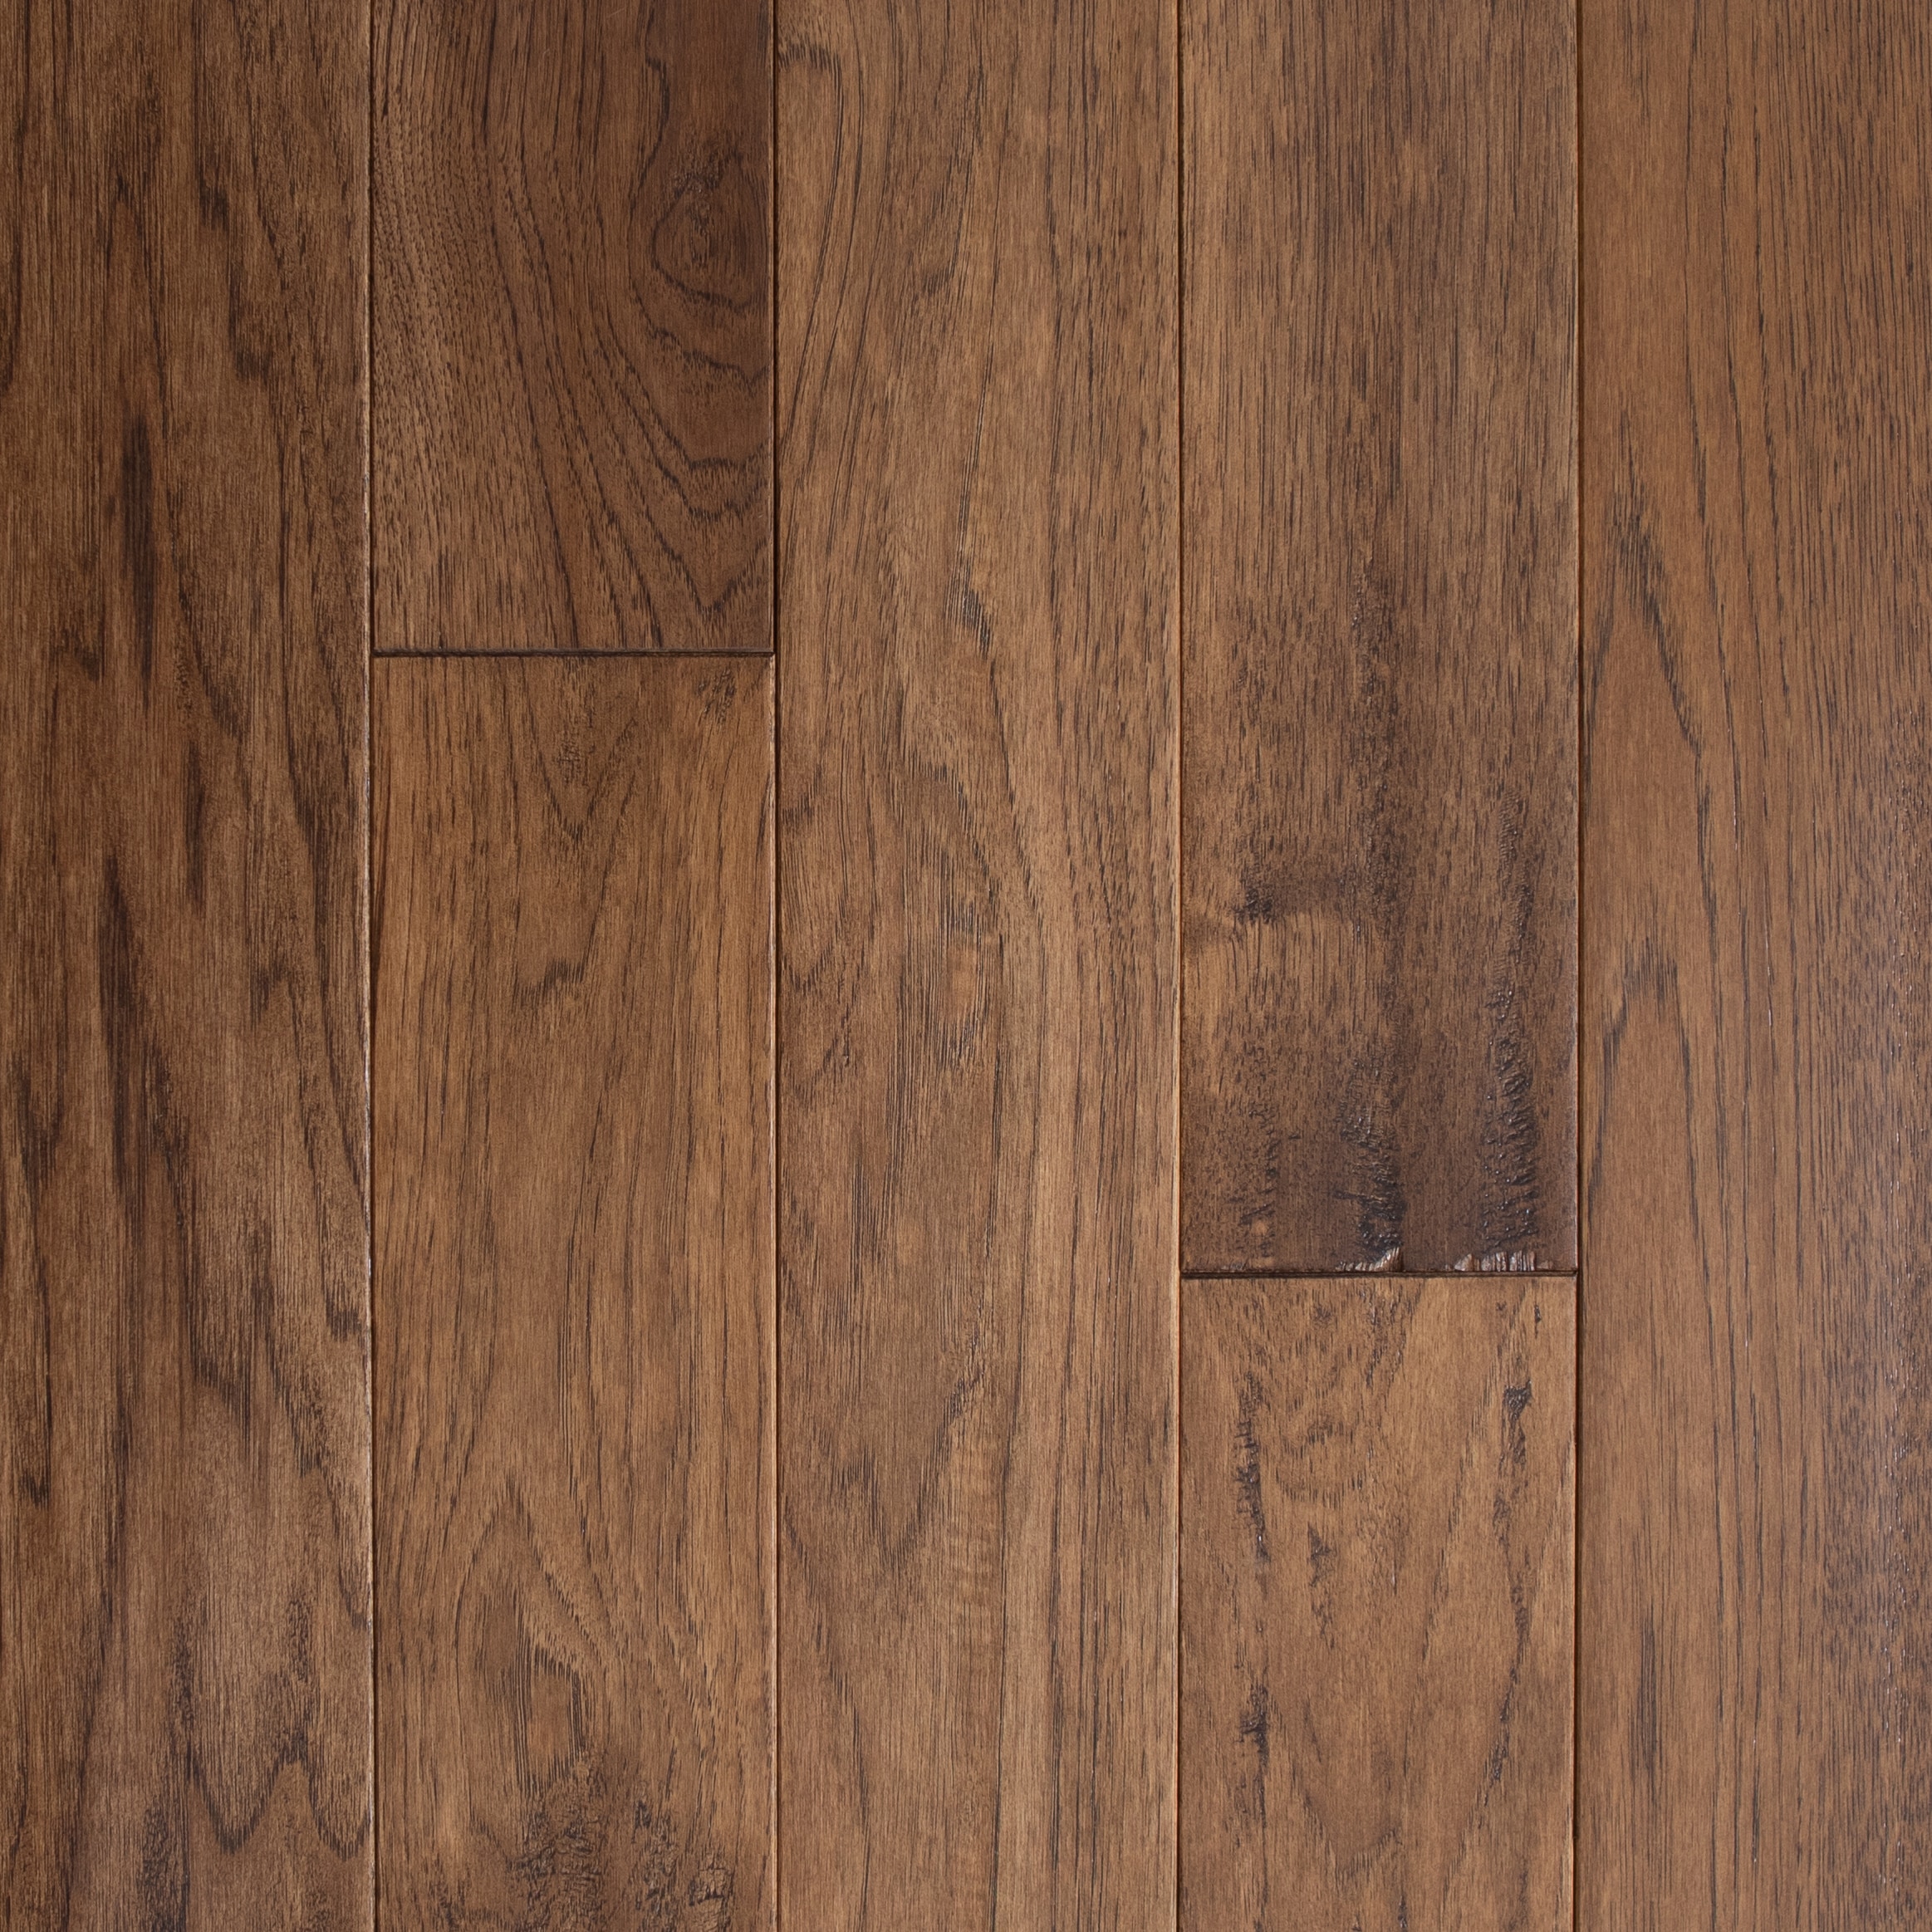 Provincial Hickory 5-in W x 3/4-in T x Varying Length Distressed Solid Hardwood Flooring (20-sq ft) in Brown | - allen + roth 22944